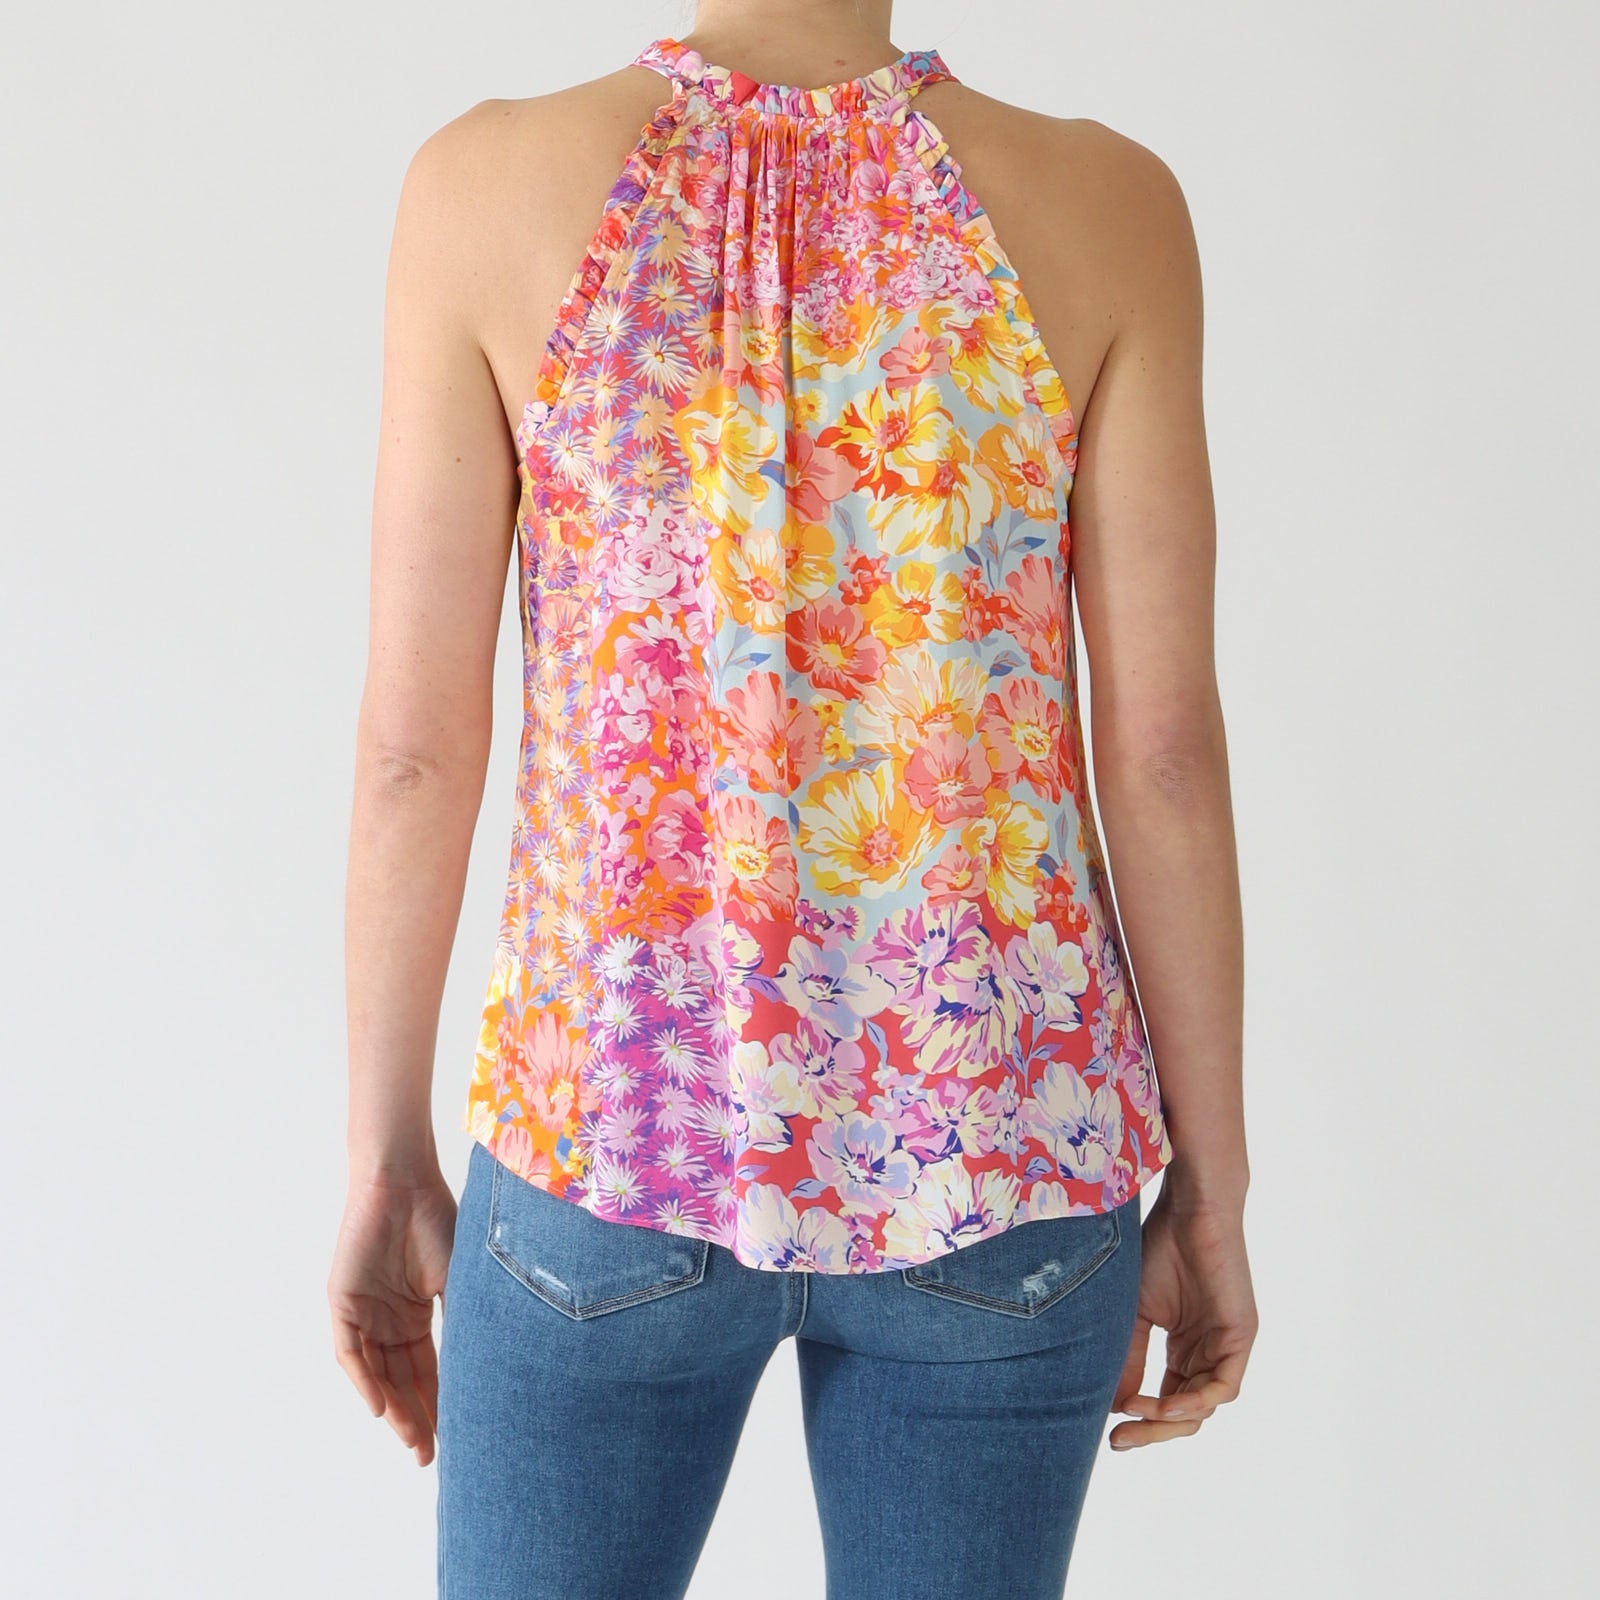 Adeline Coral Floral Print Sleeveless Top